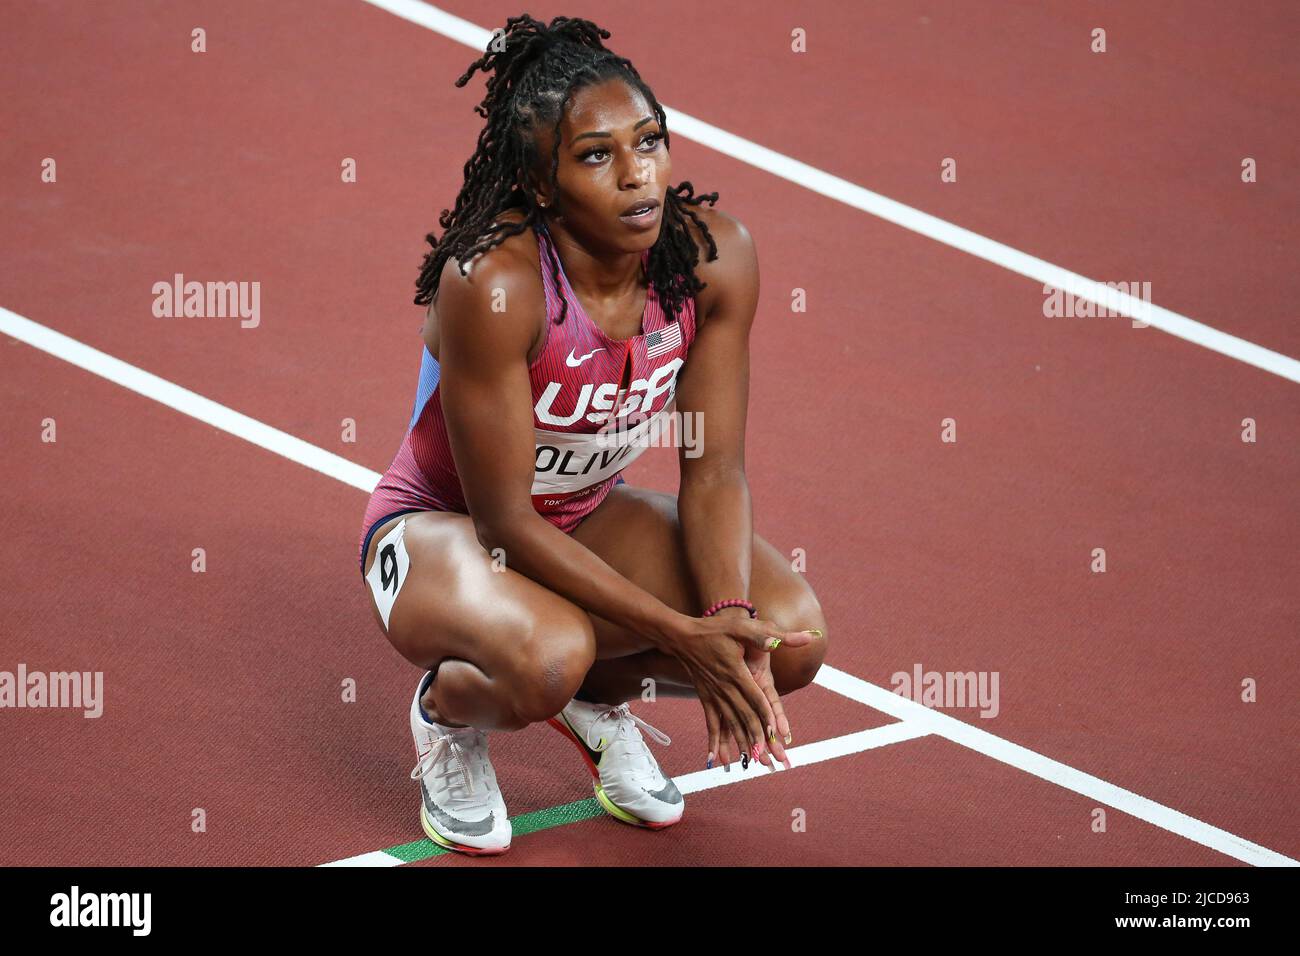 JULY 31st, 2021 - TOKYO, JAPAN: Javianne Oliver of the United States in action during the Women's 100m Semi-Finals at the Tokyo 2020 Olympic Games (Ph Stock Photo